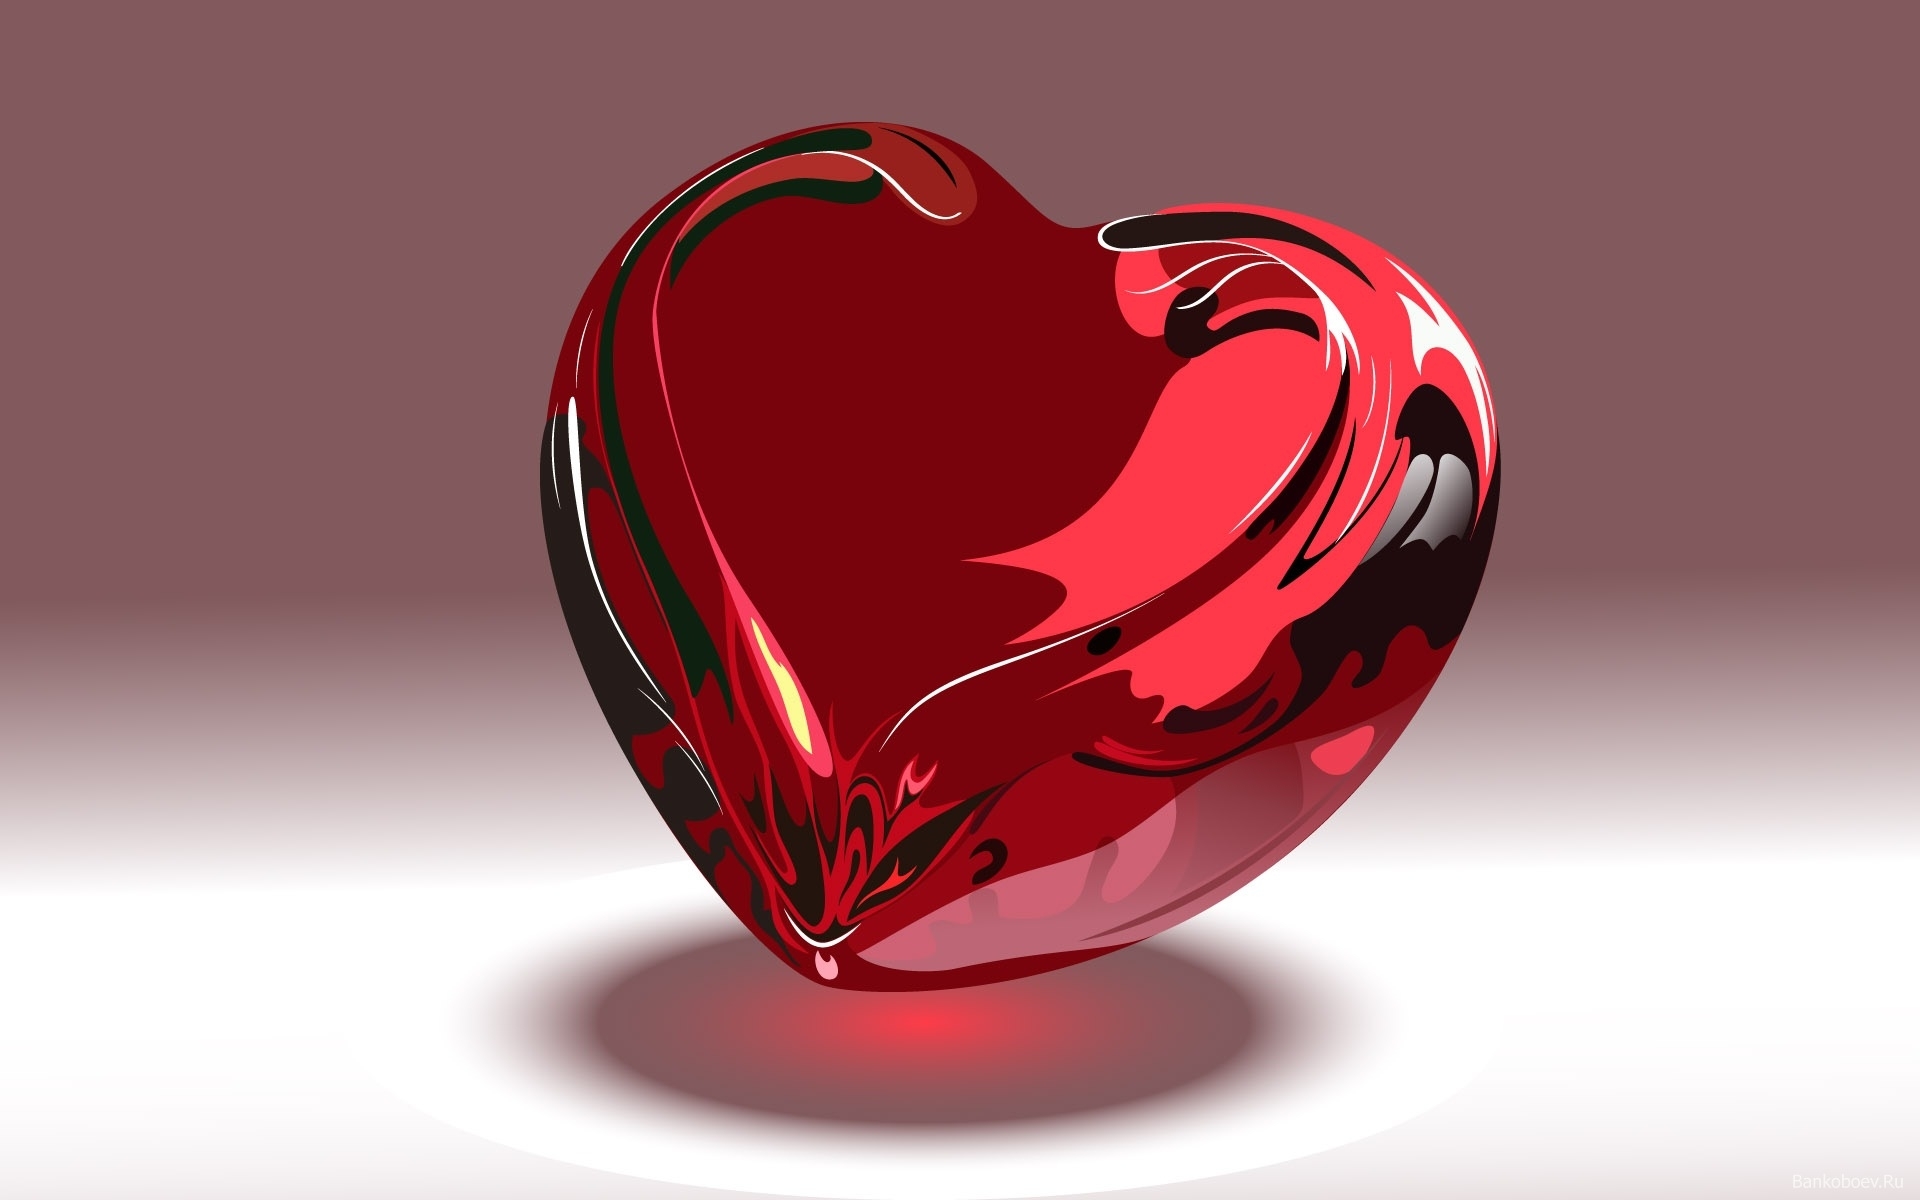 6658 download wallpaper people, holidays, hearts, valentine's day, red screensavers and pictures for free